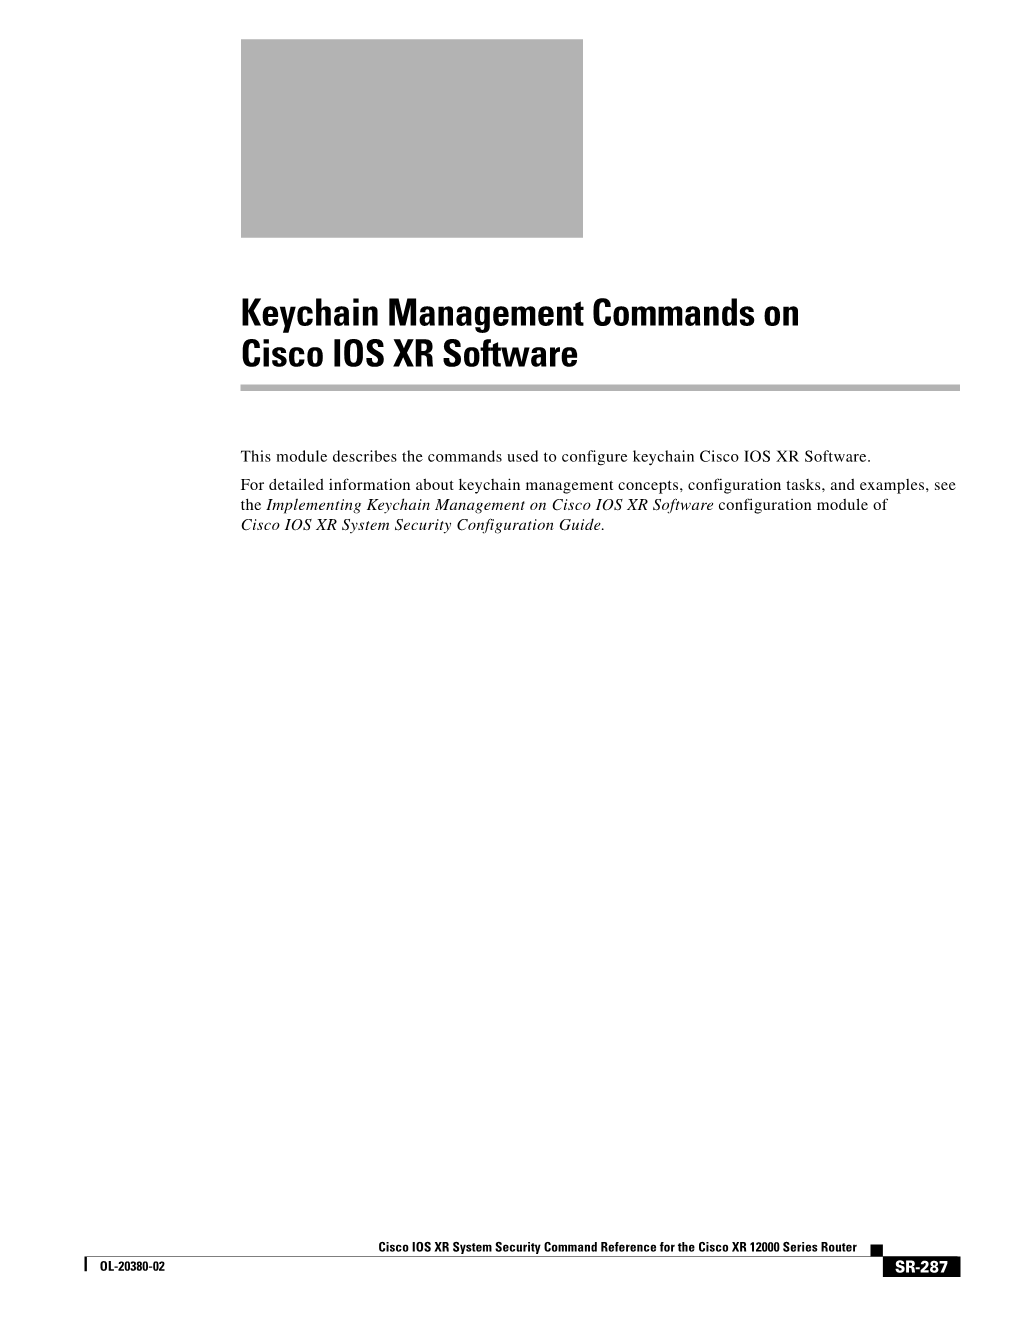 Keychain Management Commands on Cisco IOS XR Software